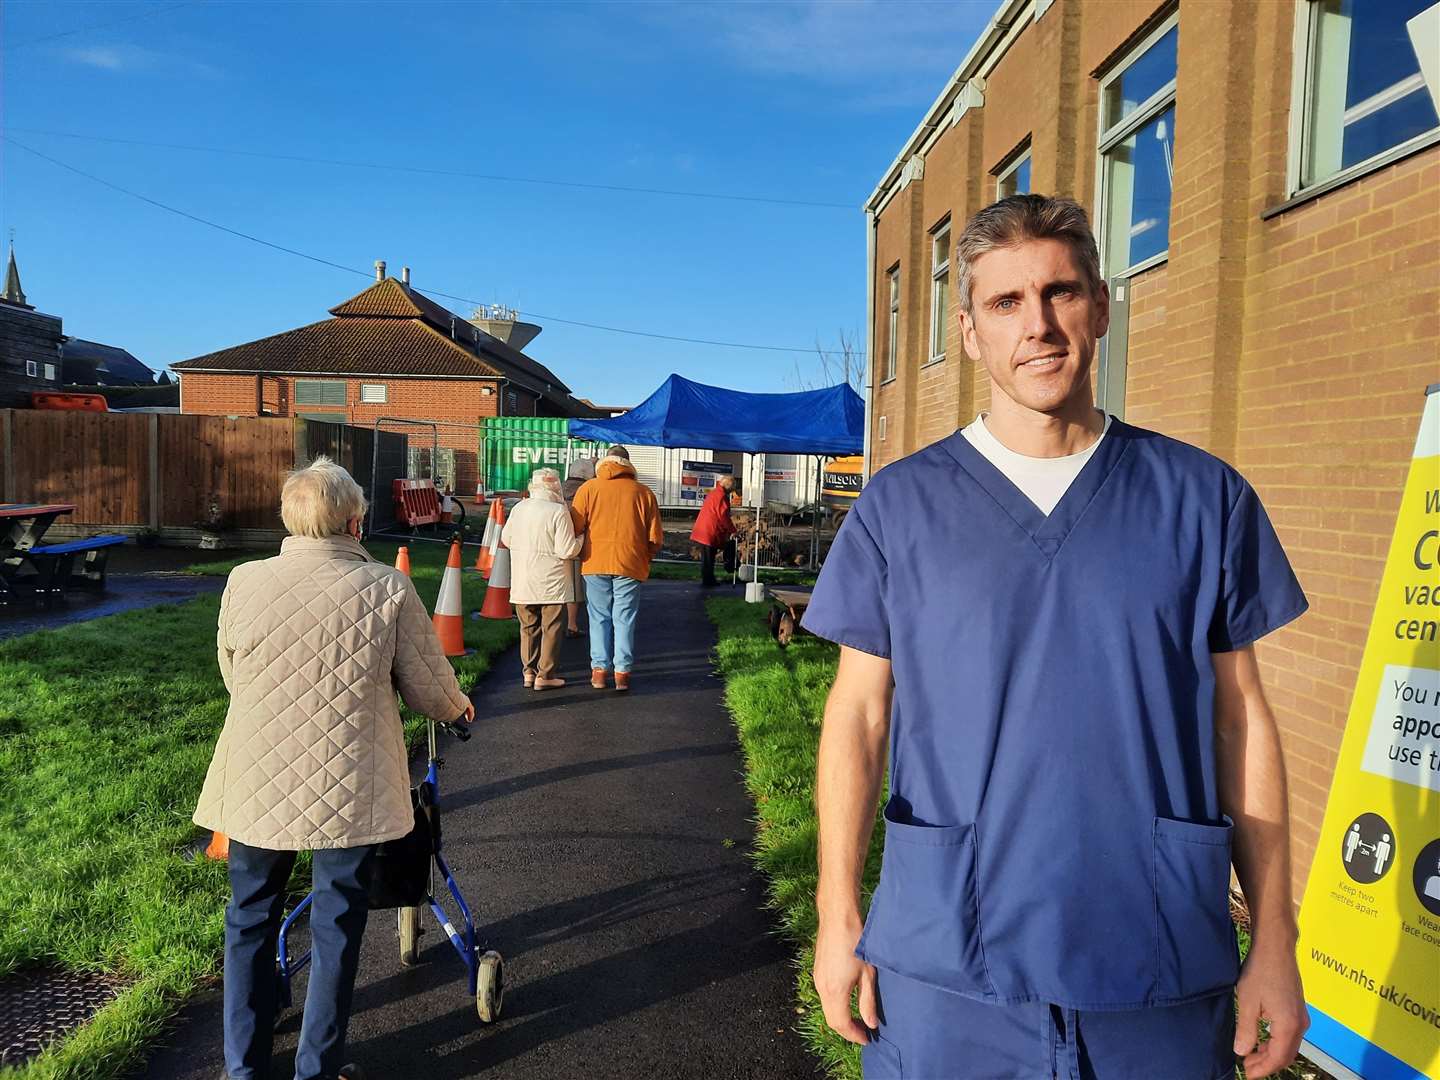 Jeremy Carter, leading the vaccine centre at the Queen Victoria Hospital in Herne Bay, stood next to the queue of people arriving for their vaccine slot